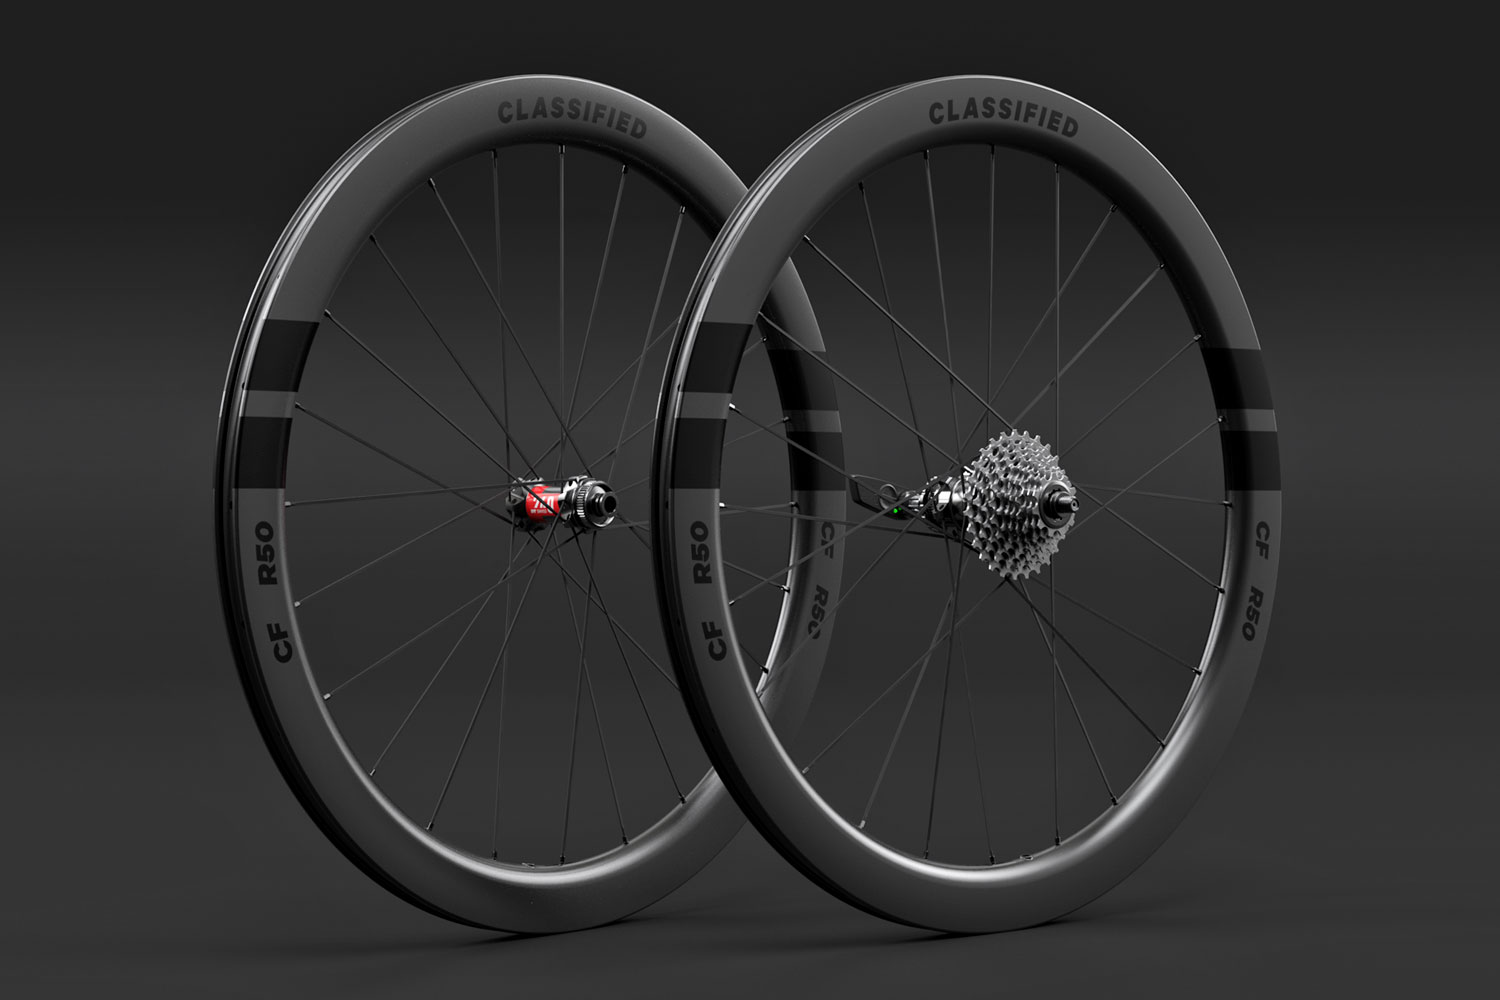 Classified Carbon Wheelsets, gravel & all-road wheels with wireless 2x internal gear hub built-in, 50mm aero road set